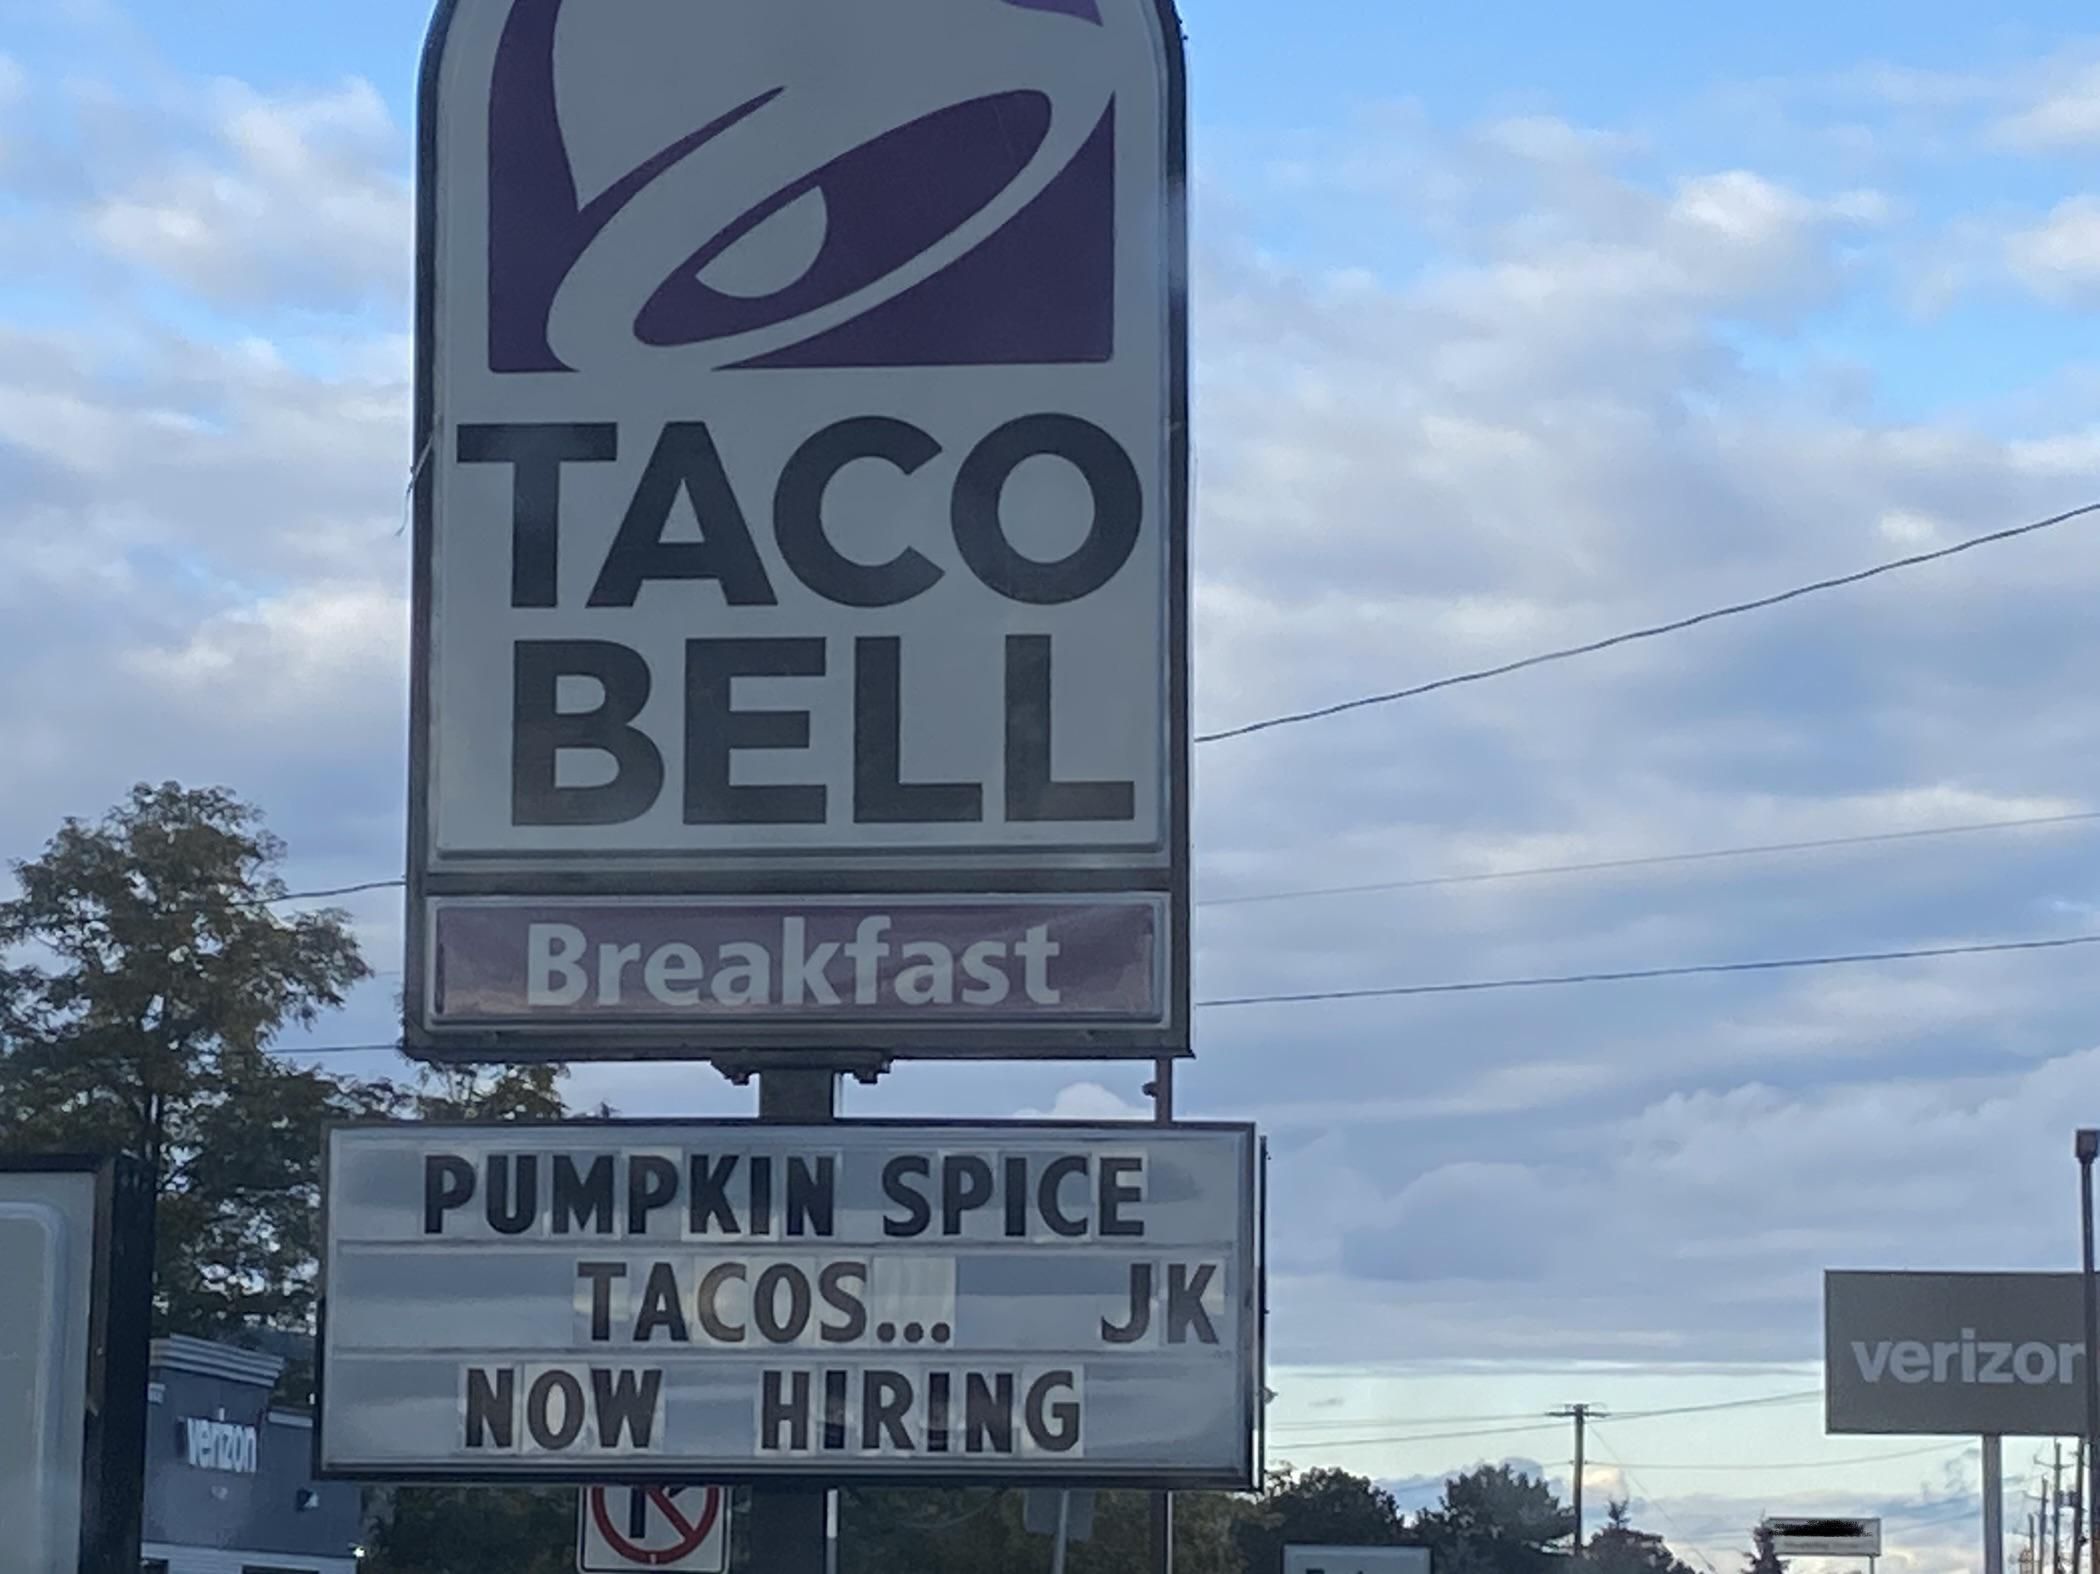 Taco Bell doing the most